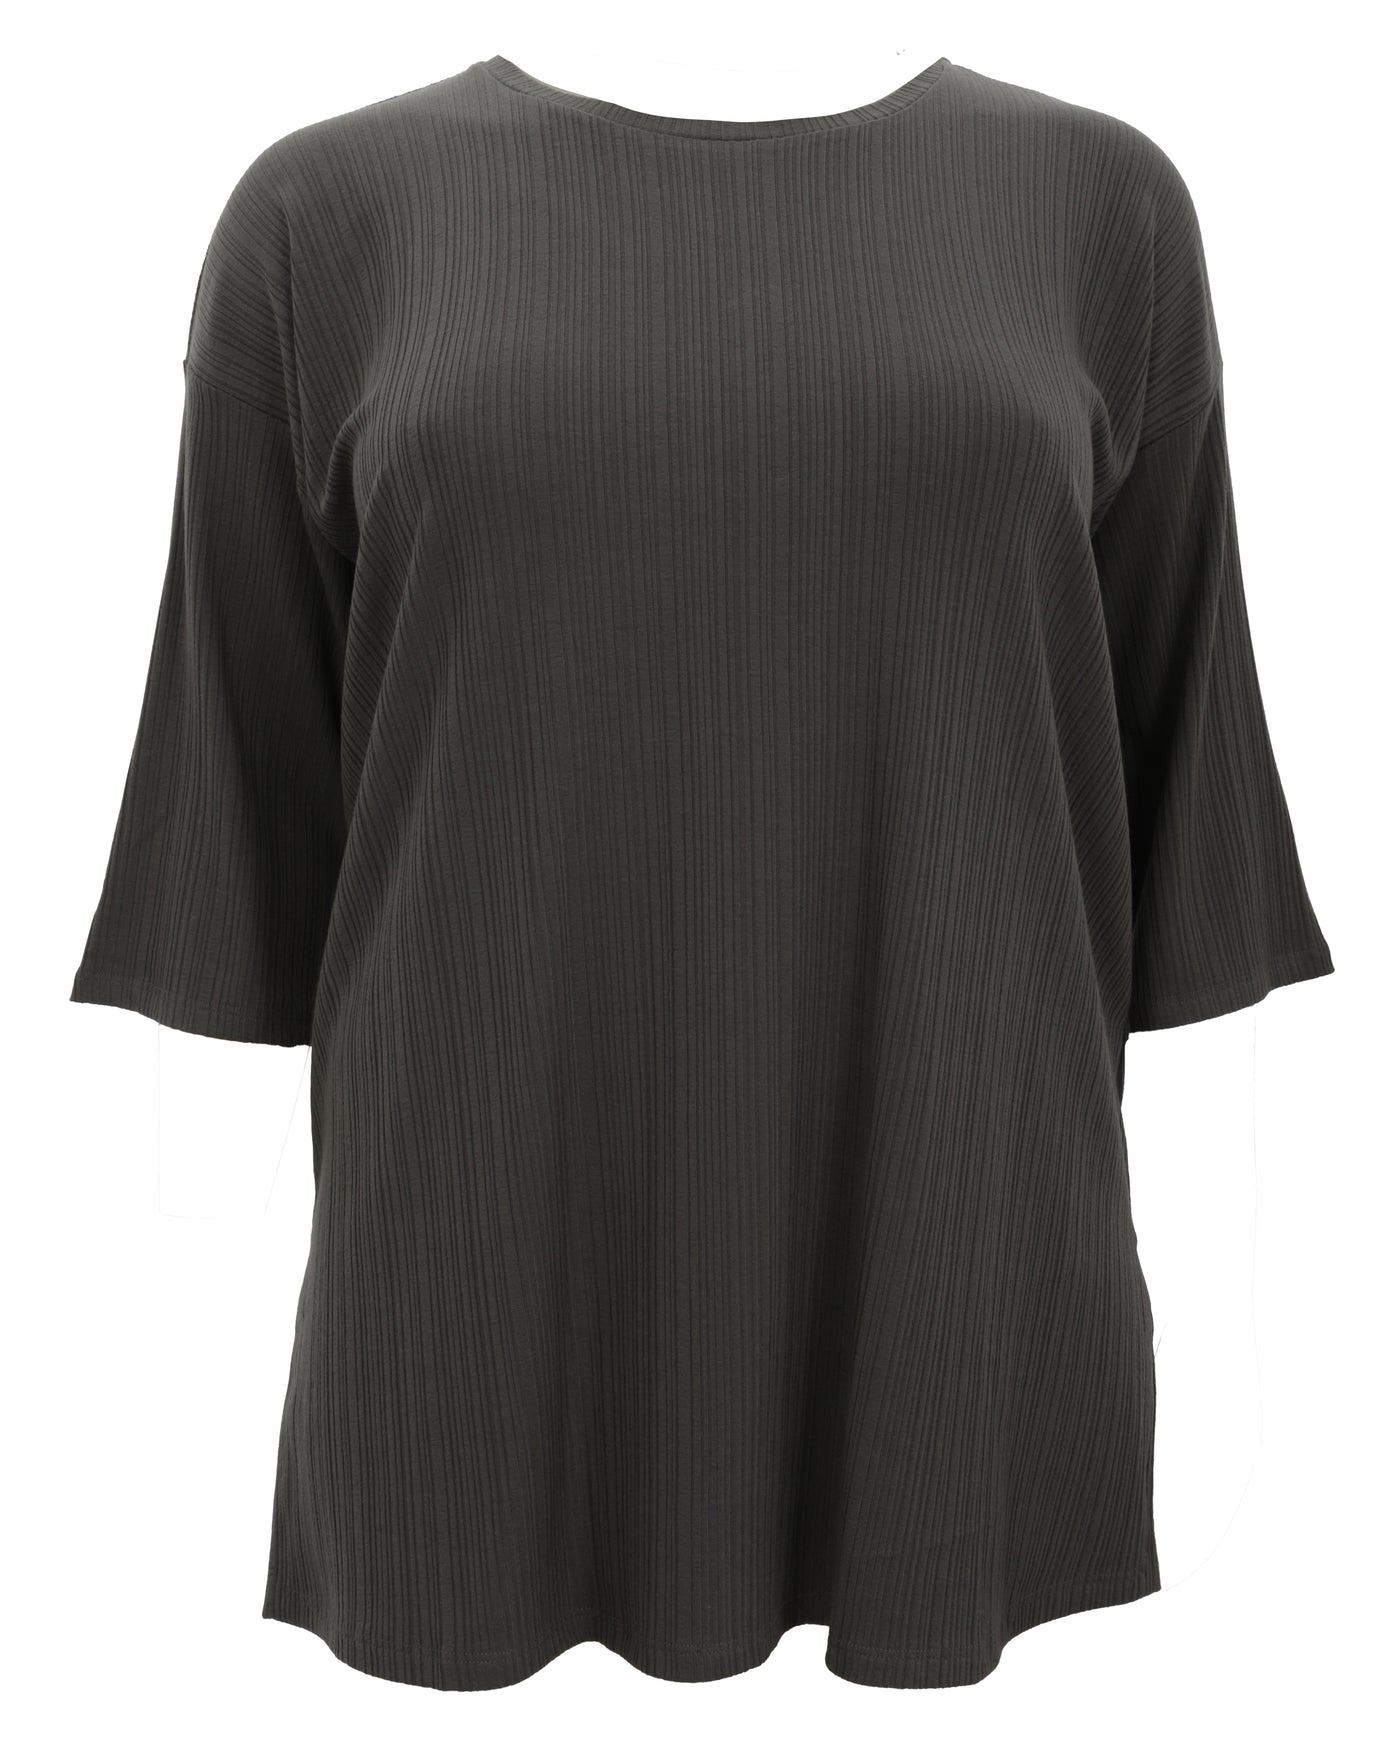 Eileen Fisher Variegated Rib Knit Elbow Sleeve Crewneck Top in Grove